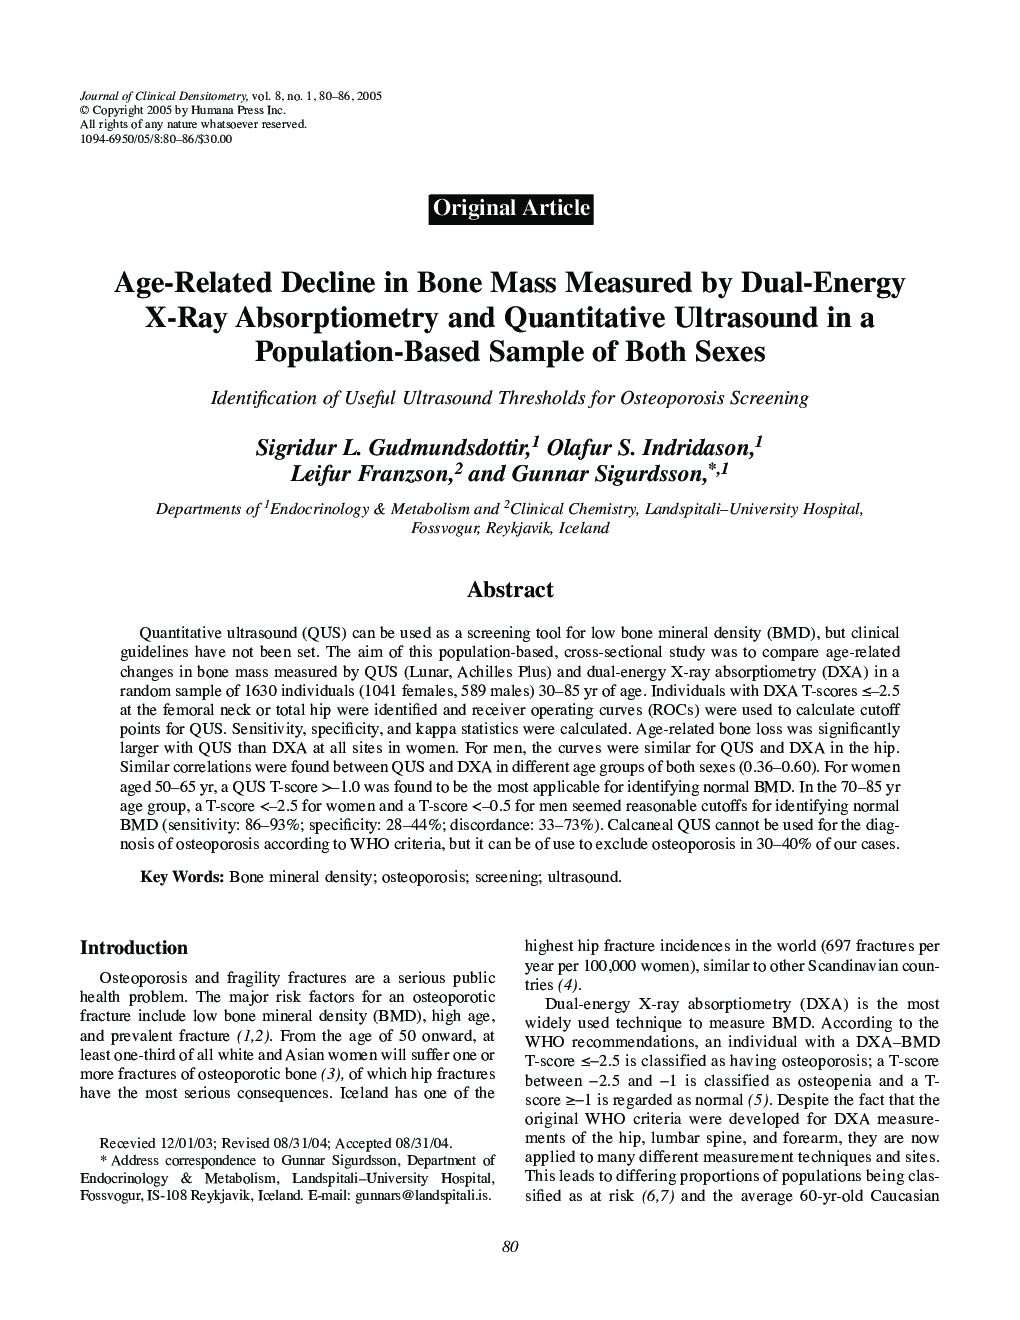 Age-Related Decline in Bone Mass Measured by Dual-Energy X-Ray Absorptiometry and Quantitative Ultrasound in a Population-Based Sample of Both Sexes